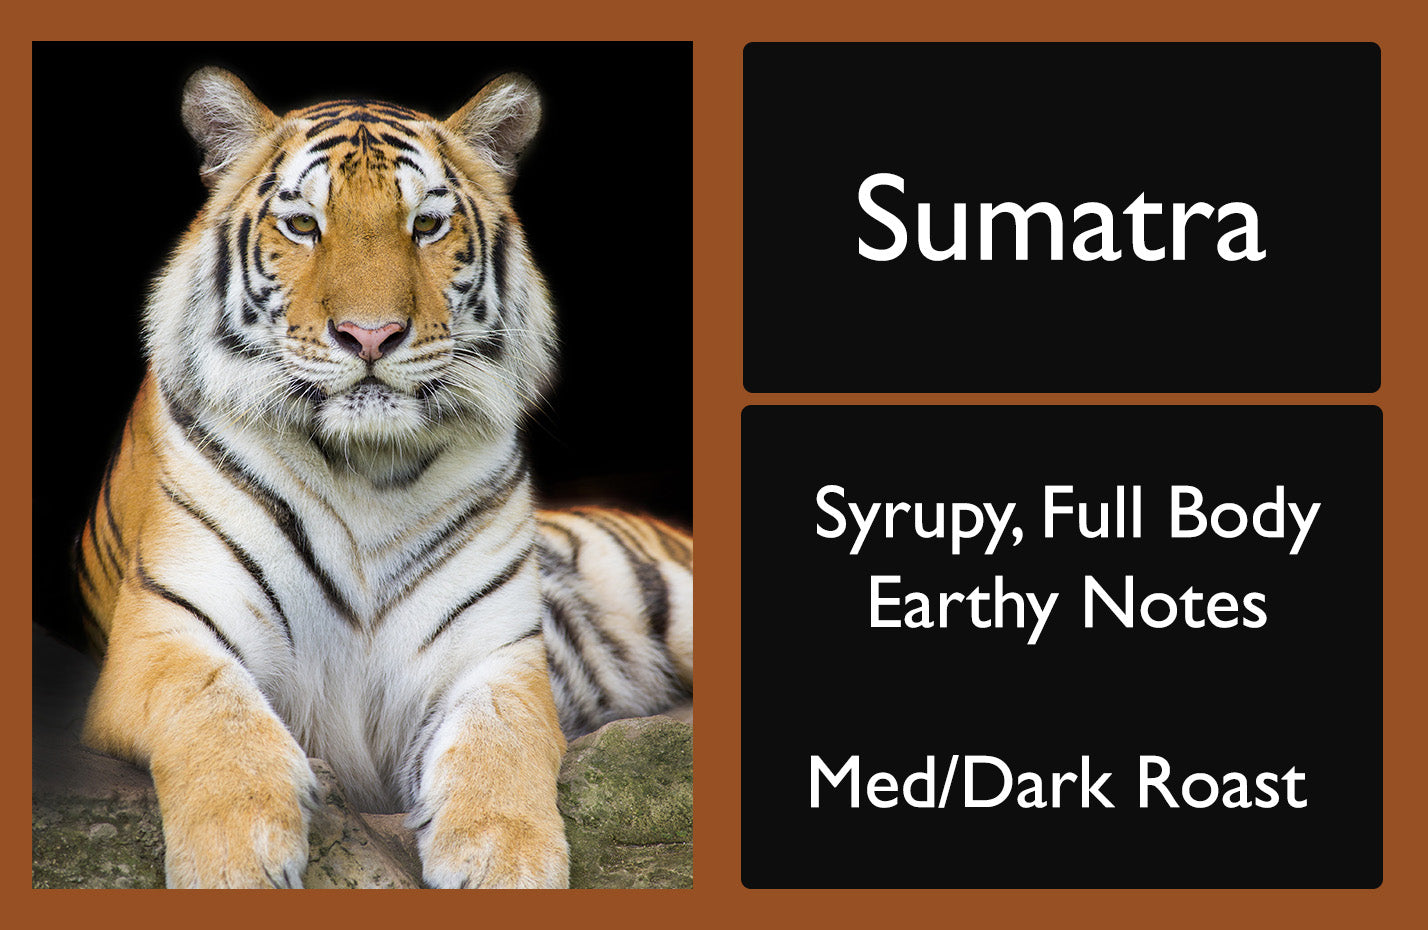 Picture of a bag of Sumatra Coffee